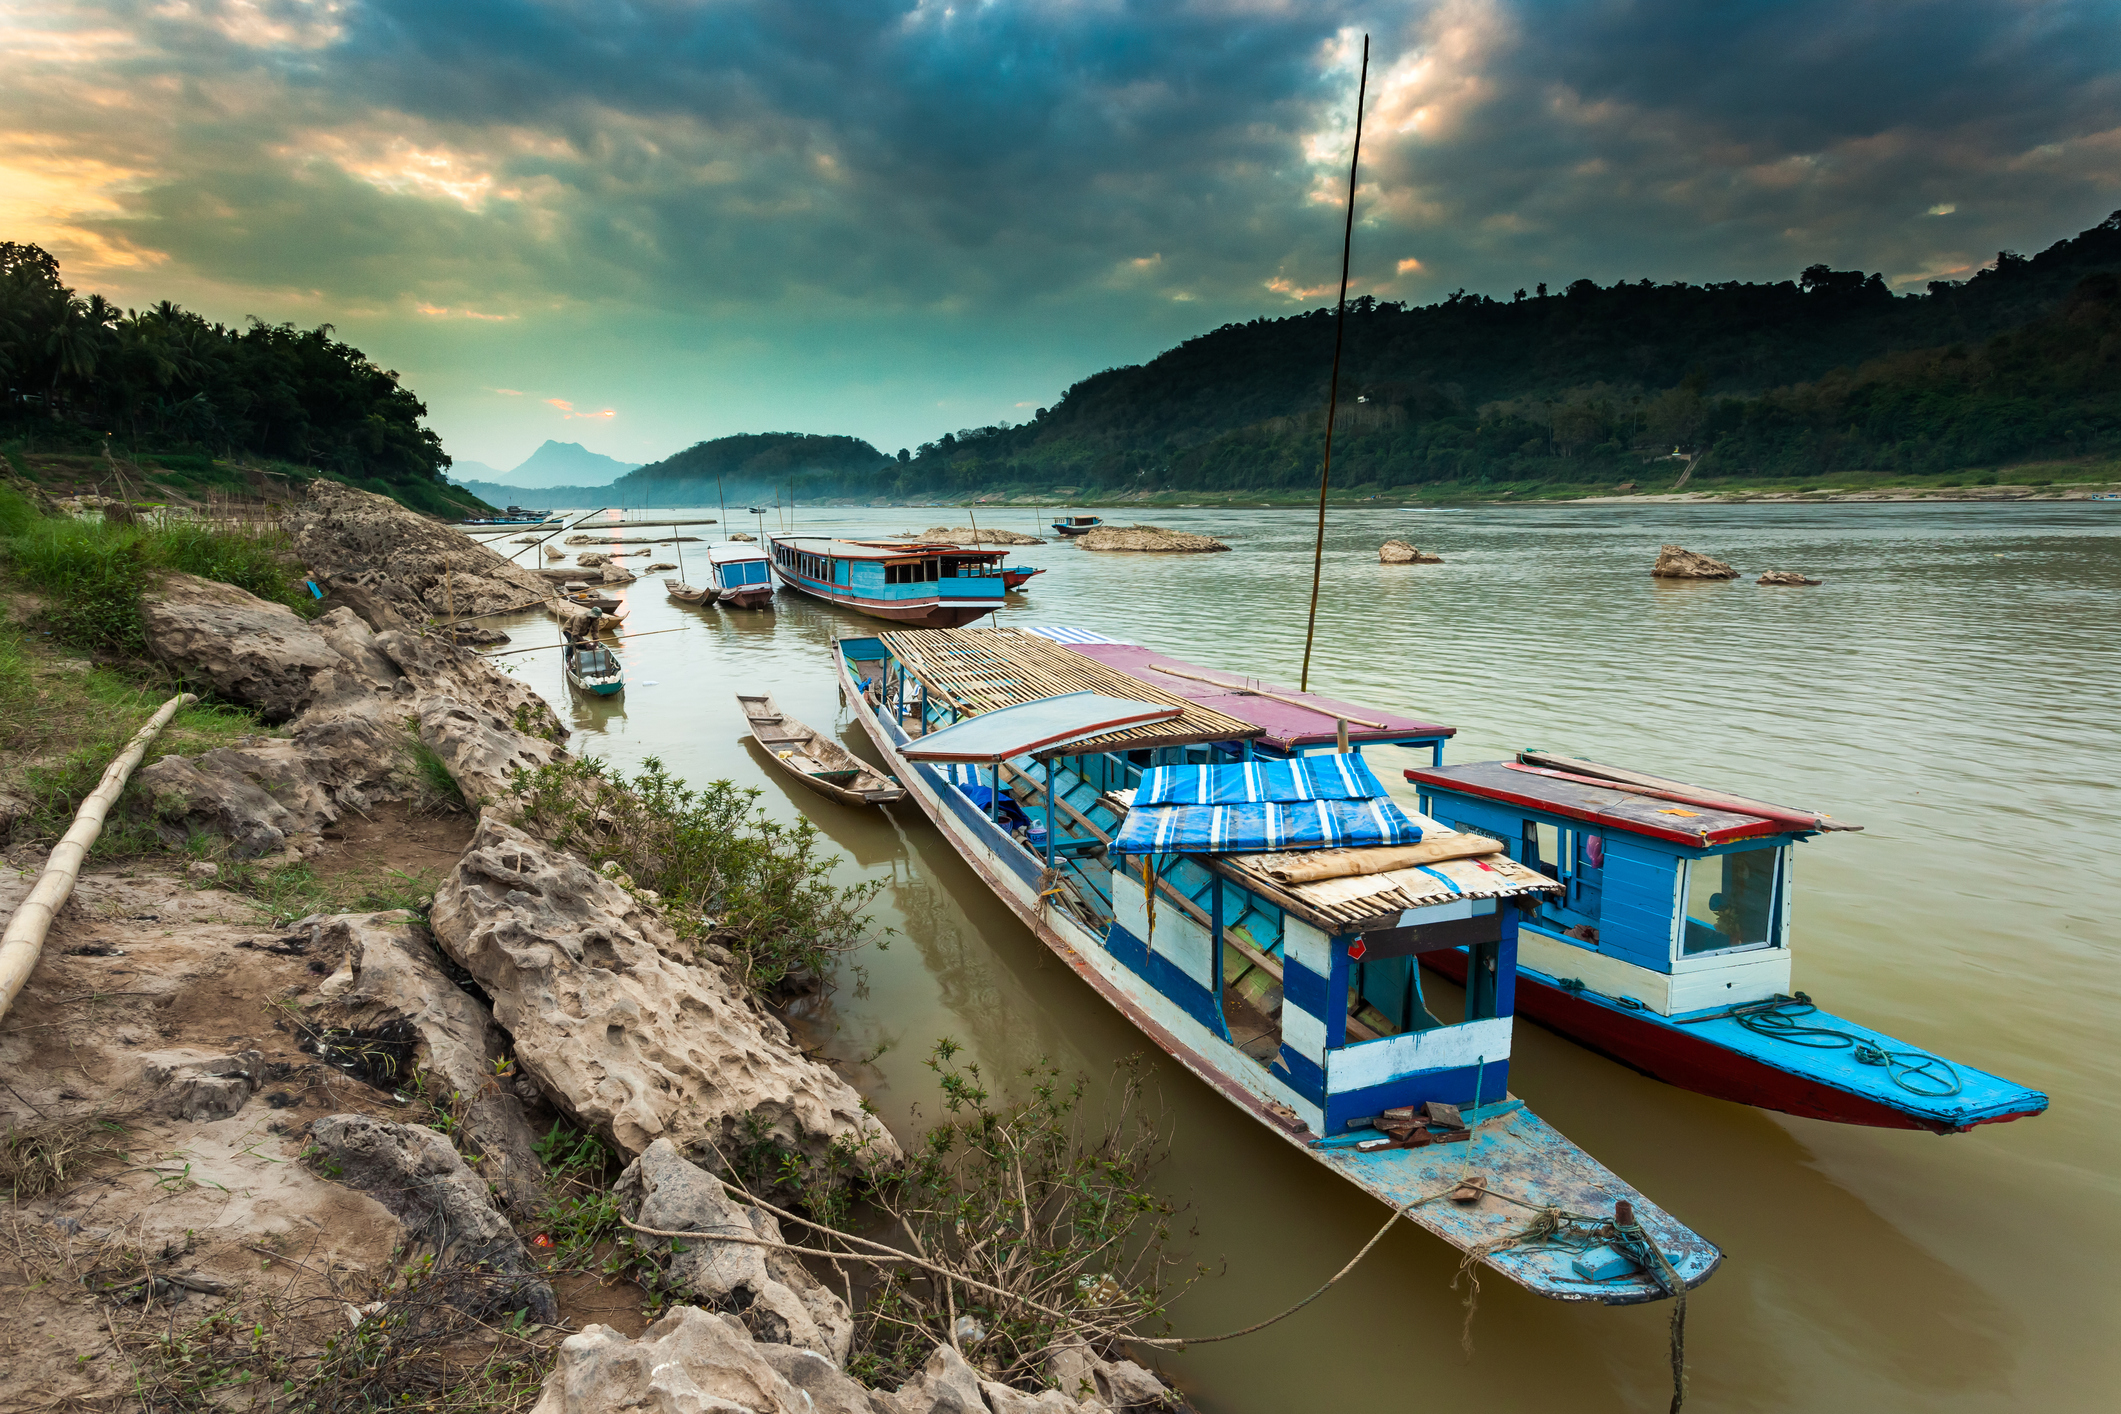 Mekong river, a few small boats by the riverside and Luang Prabang in the background